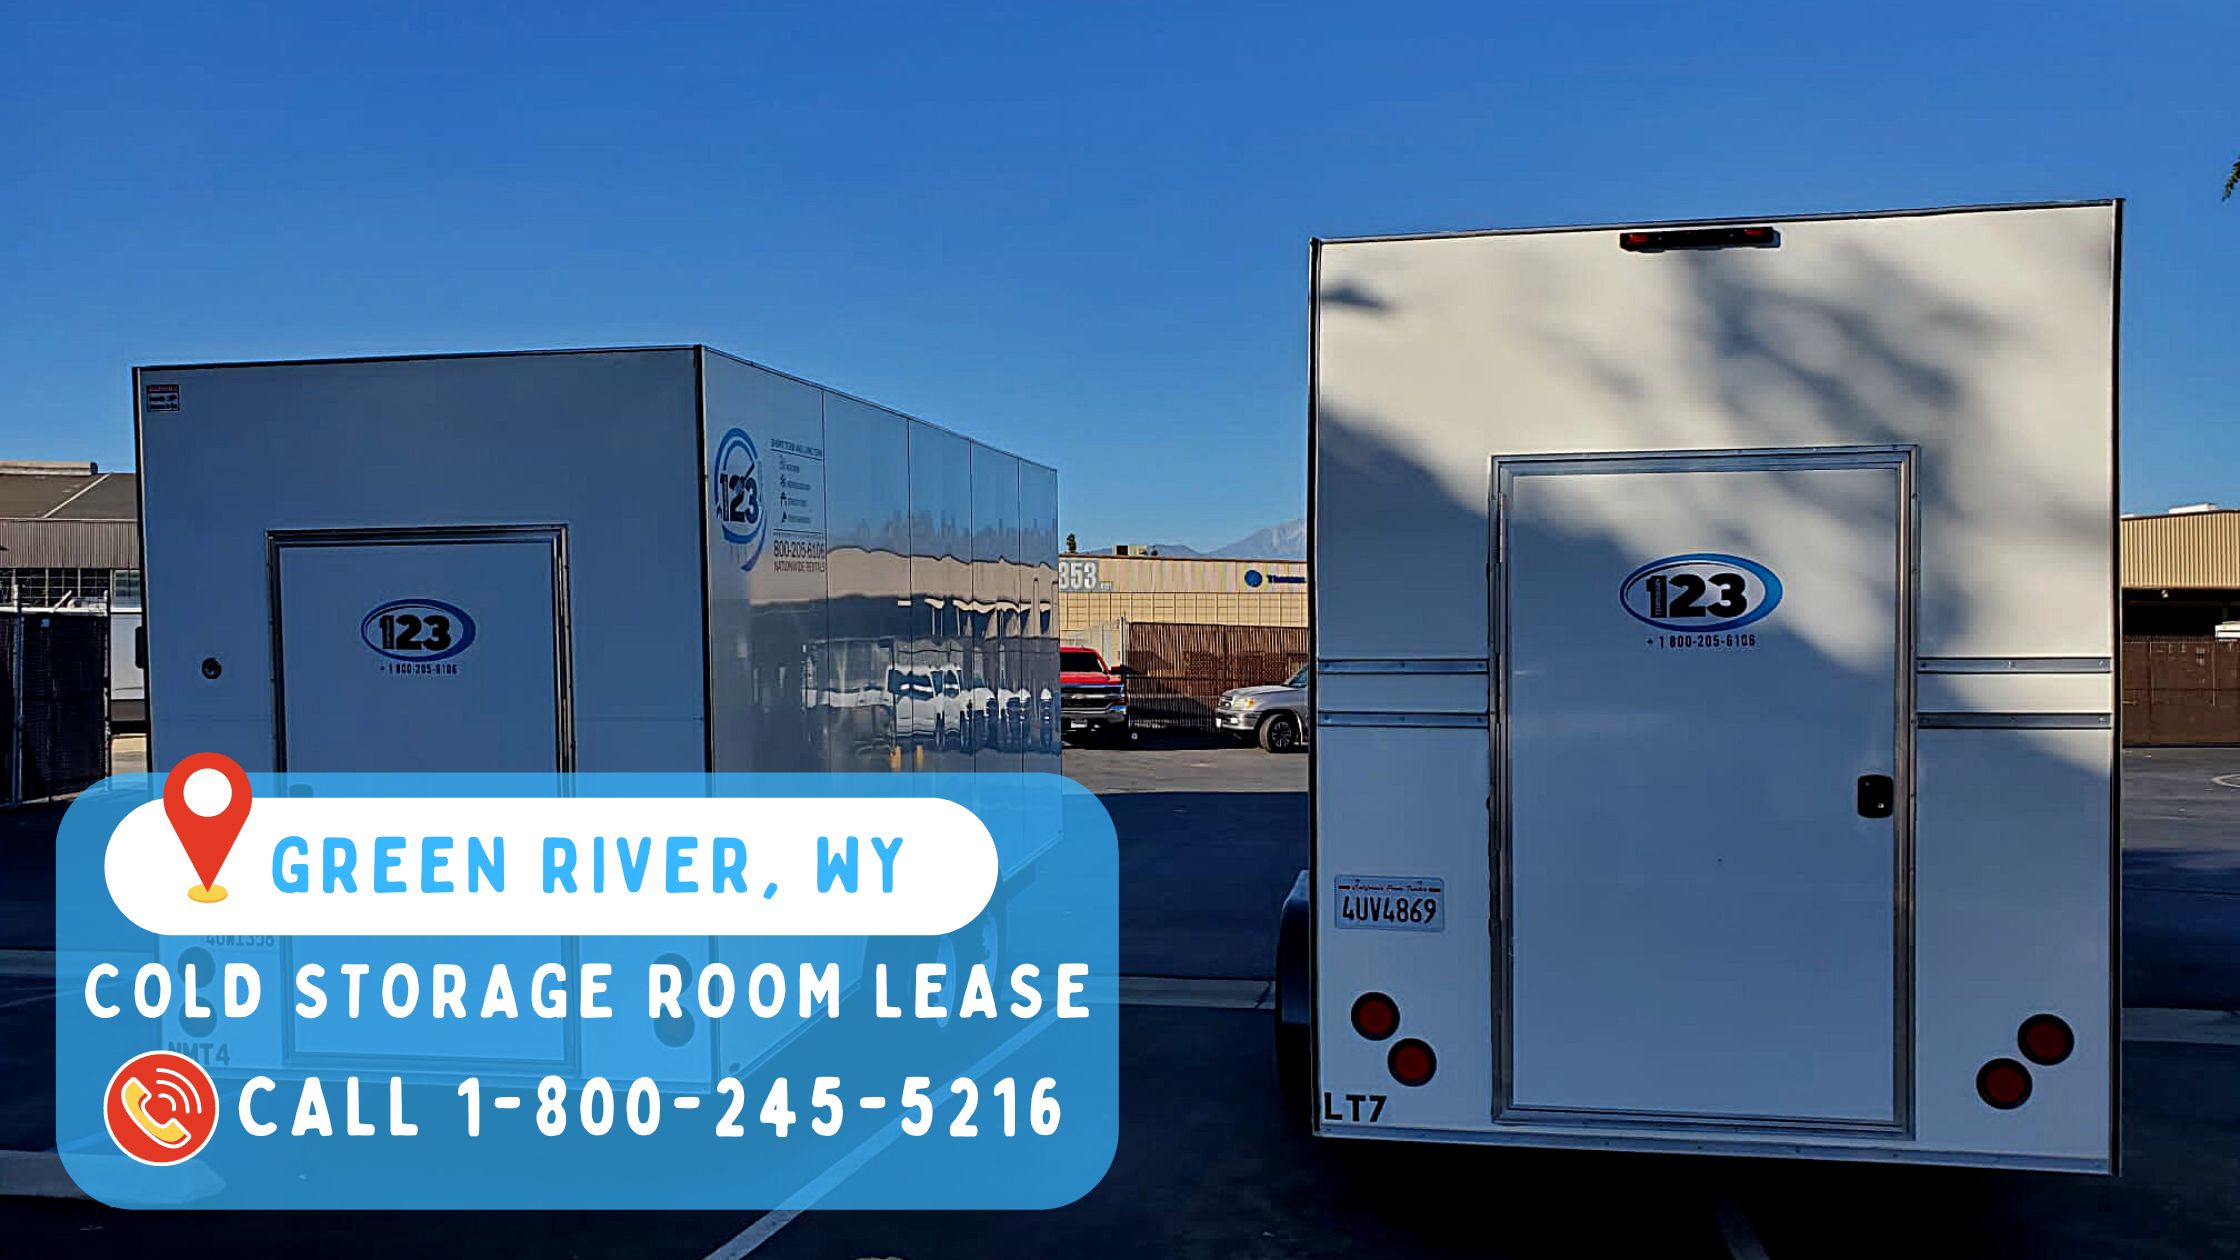 Cold Storage Room Lease in Green River